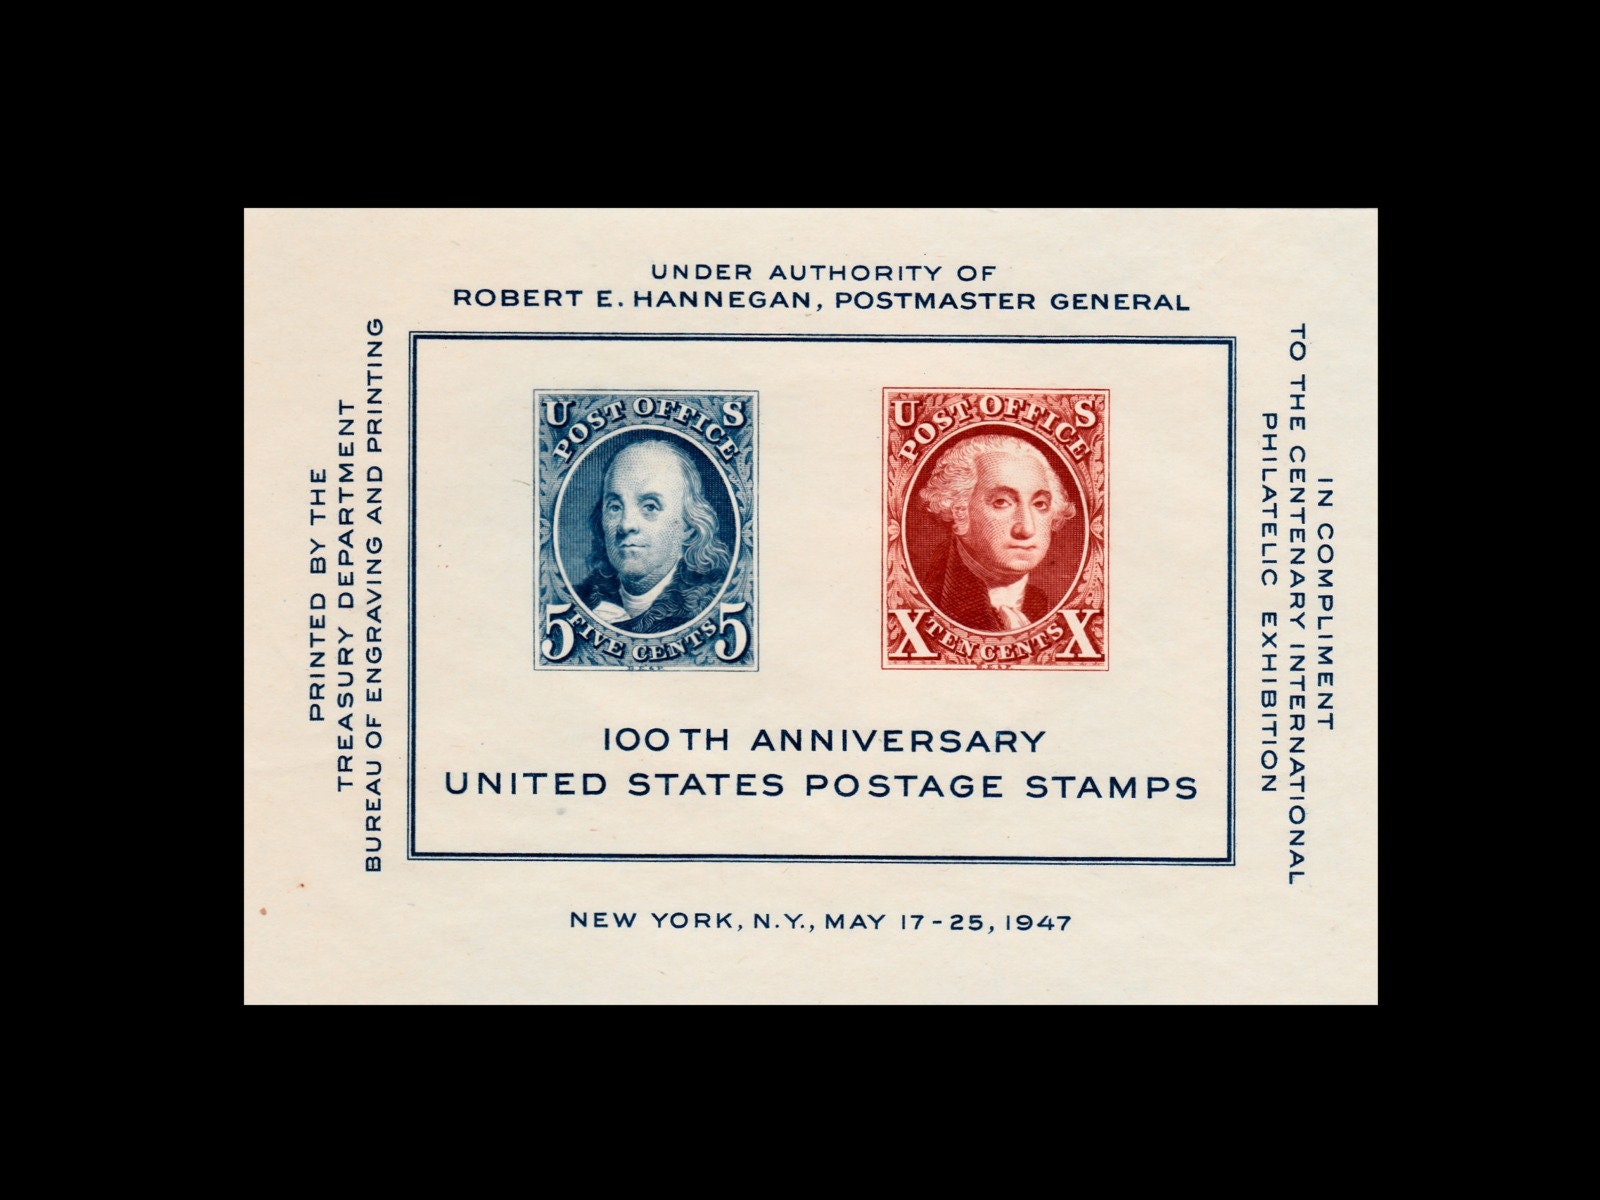 COMPLETE MINT SET OF POSTAGE STAMPS ISSUED IN THE YEAR 1961 BY THE US POST  OFFICE DEPT.